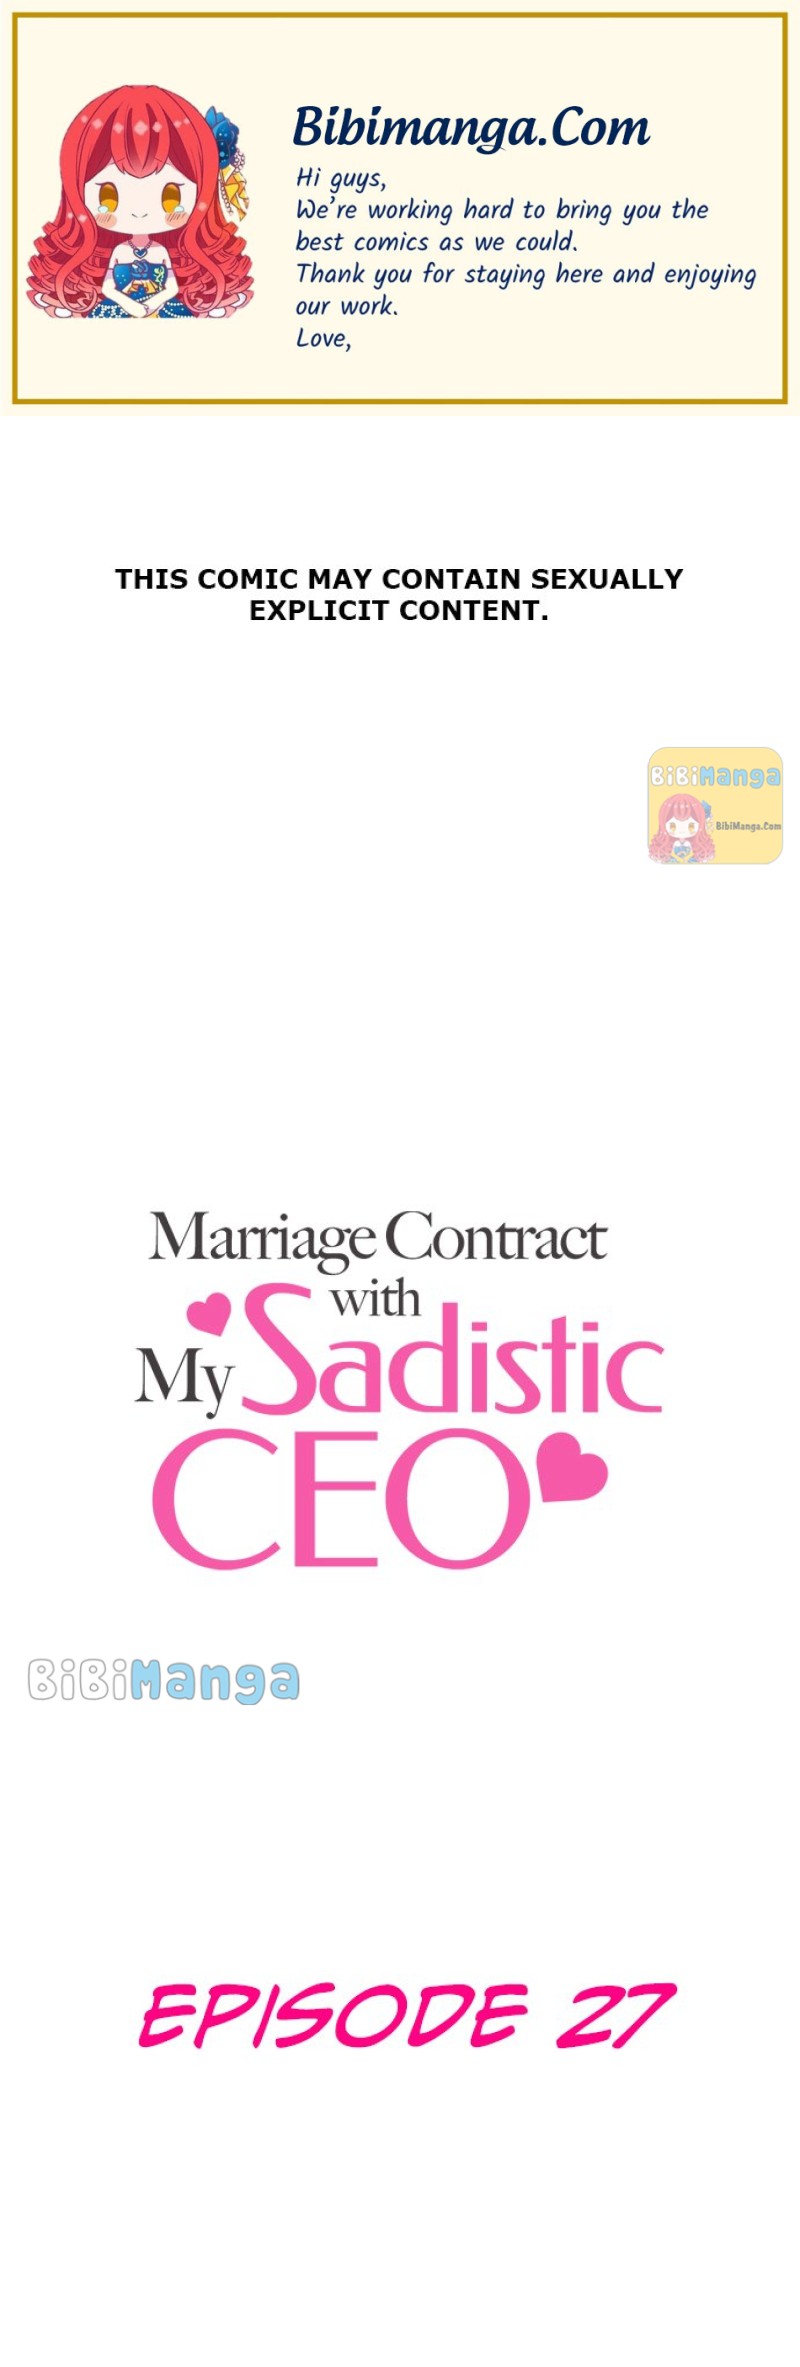 Marriage Contract With My Sadistic Ceo - Page 1